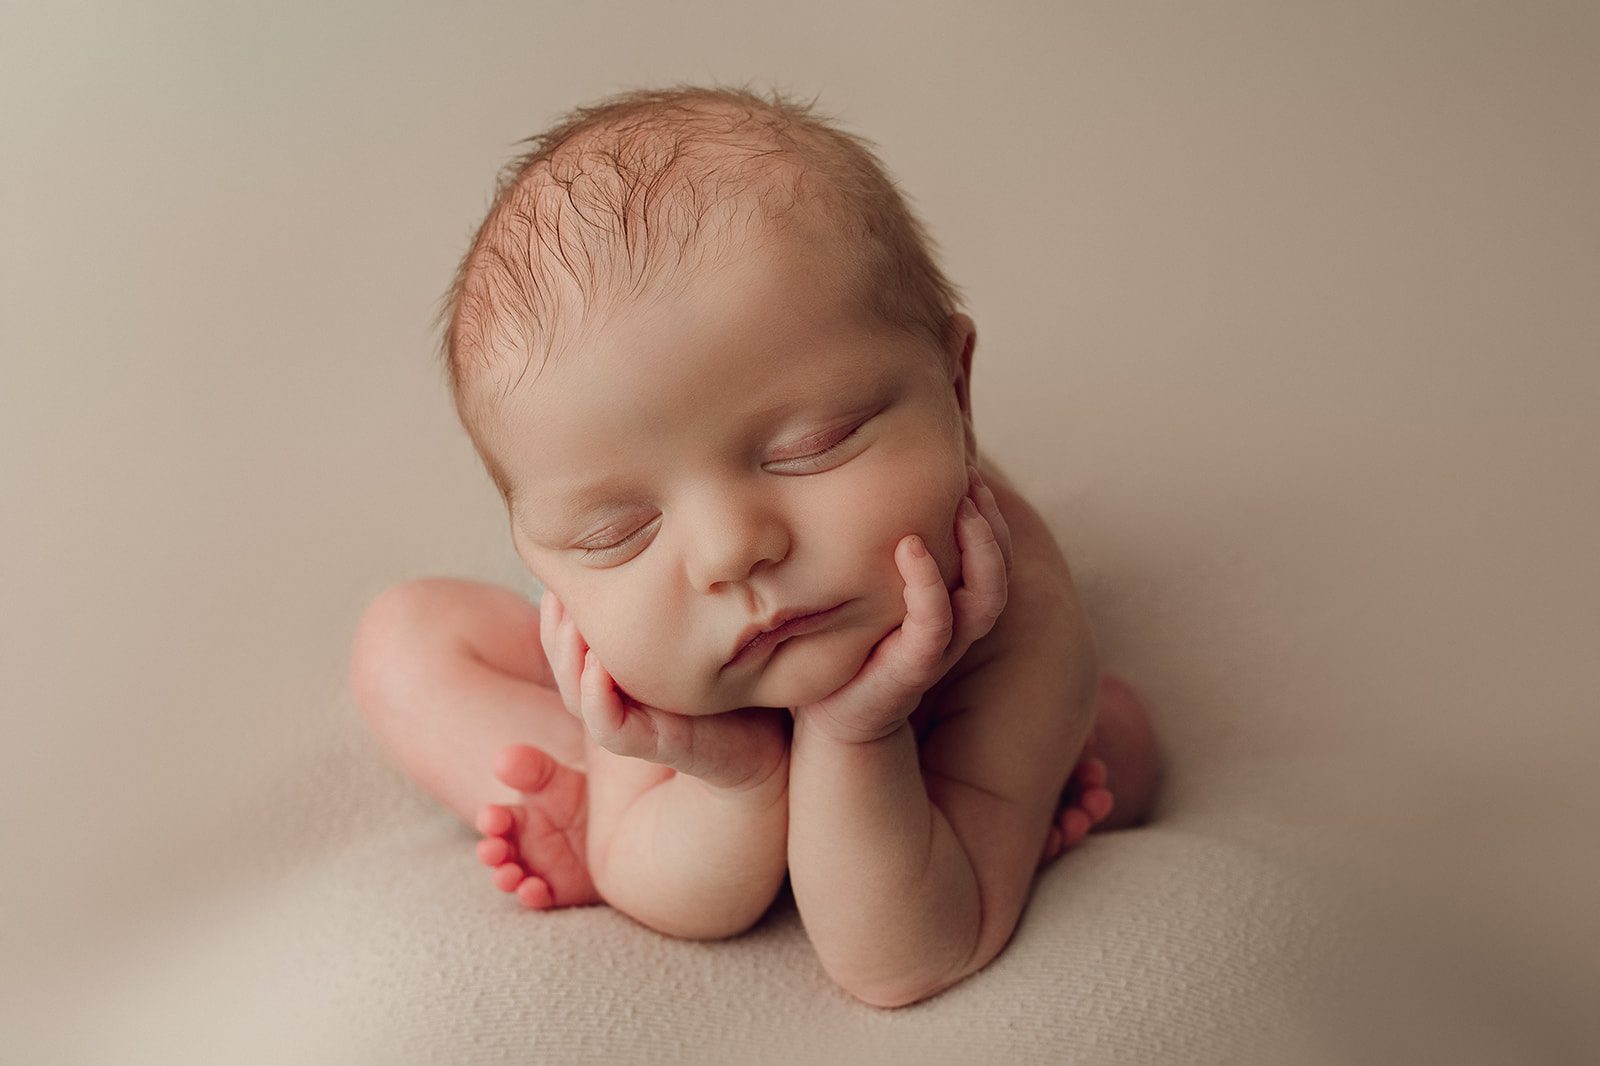 A newborn baby rests its sleeping head on its hands